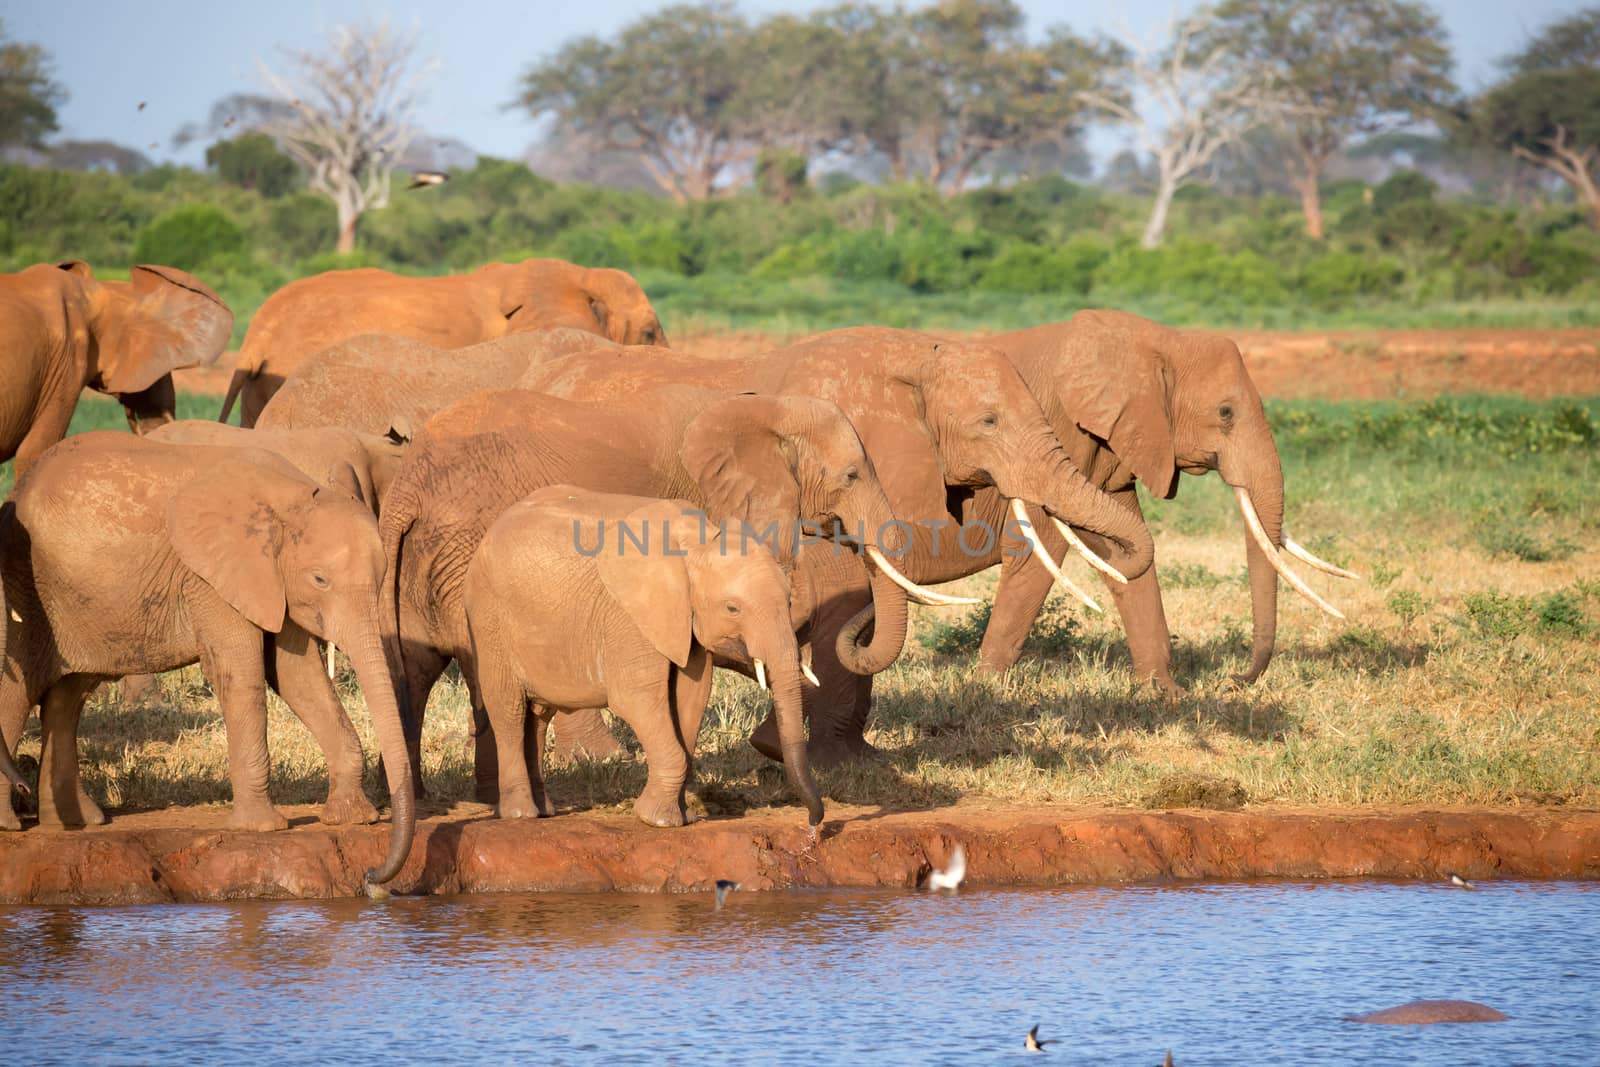 A family of red elephants at a water hole in the middle of the s by 25ehaag6